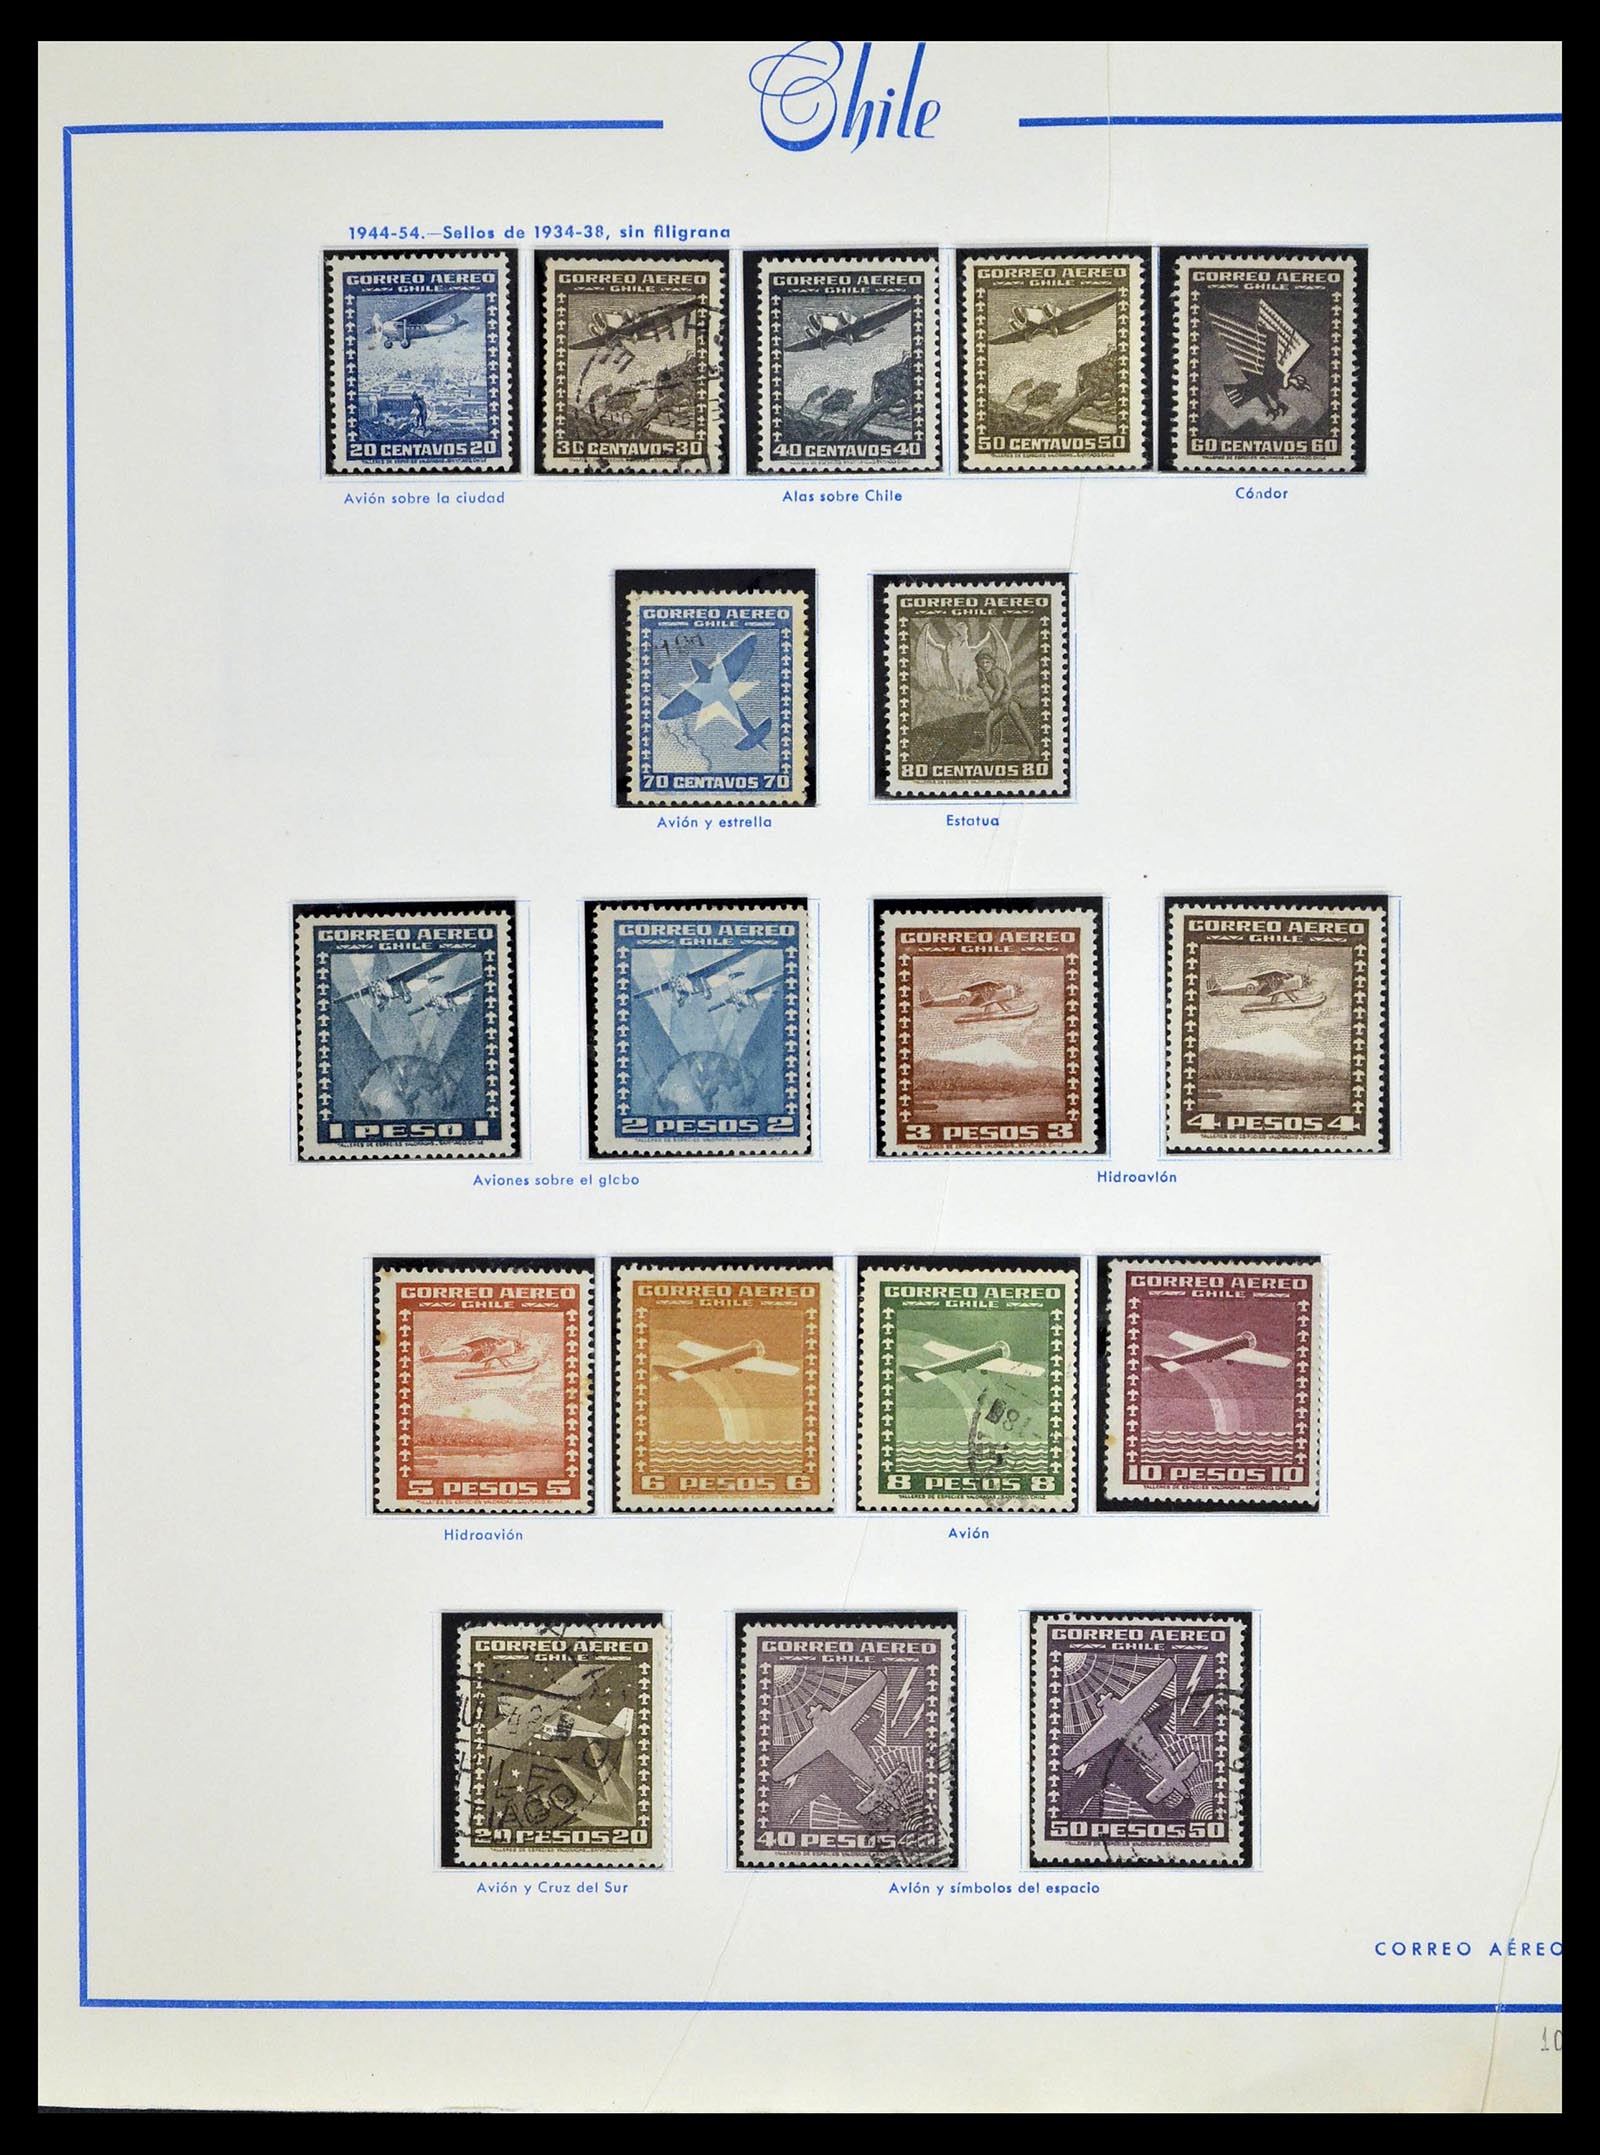 39213 0047 - Stamp collection 39213 Chile 1853-1970.